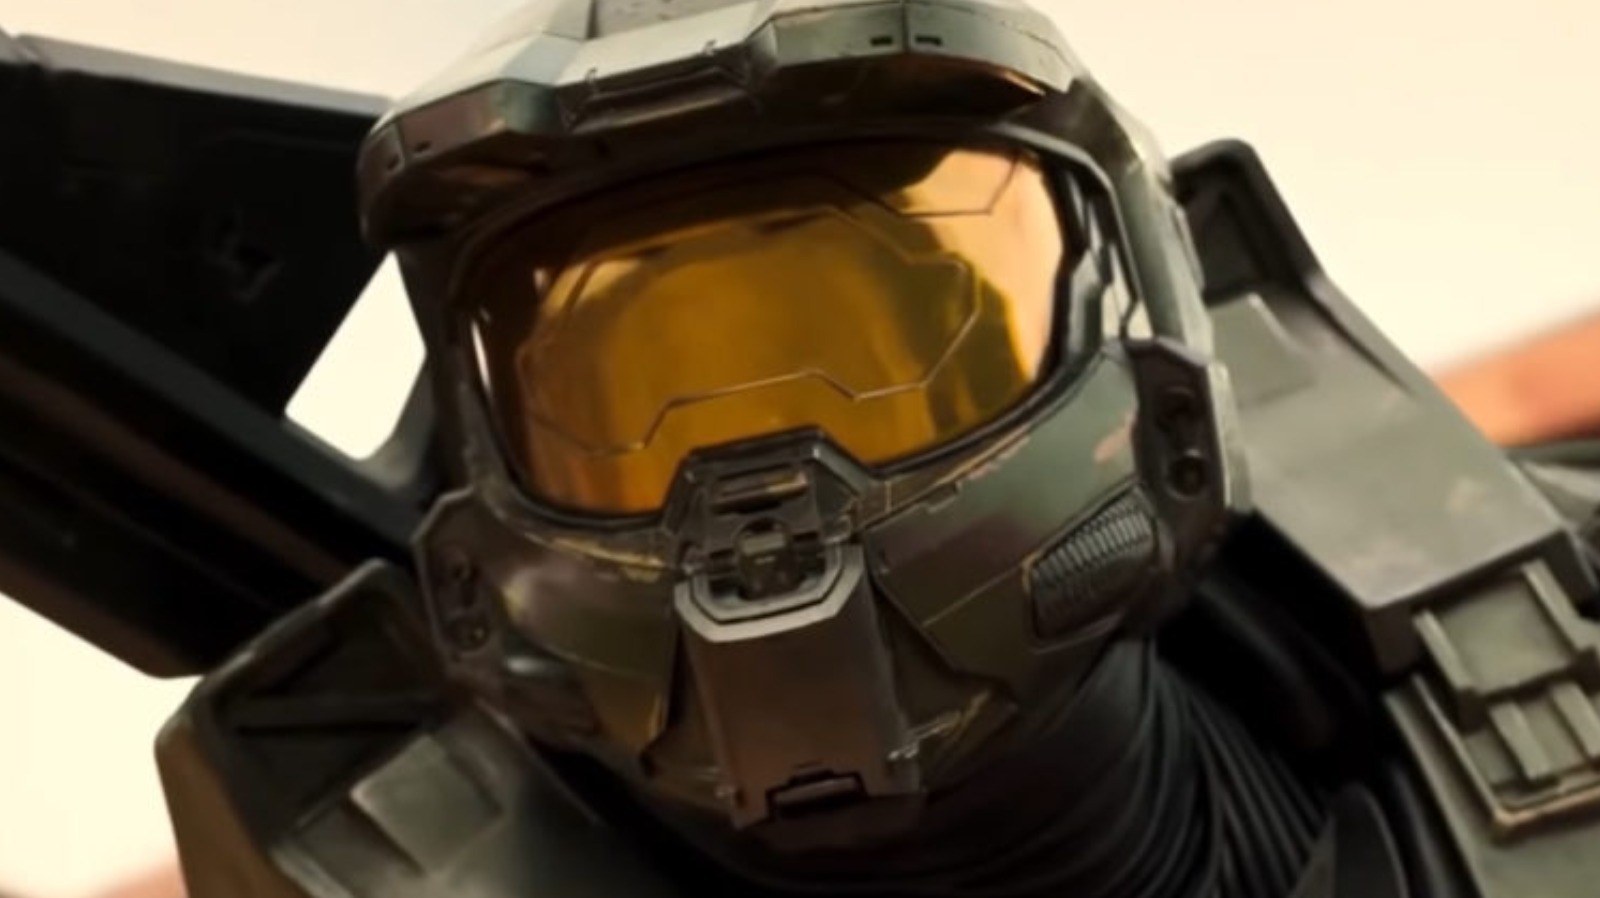 Production is finally starting on the 'Halo' TV series